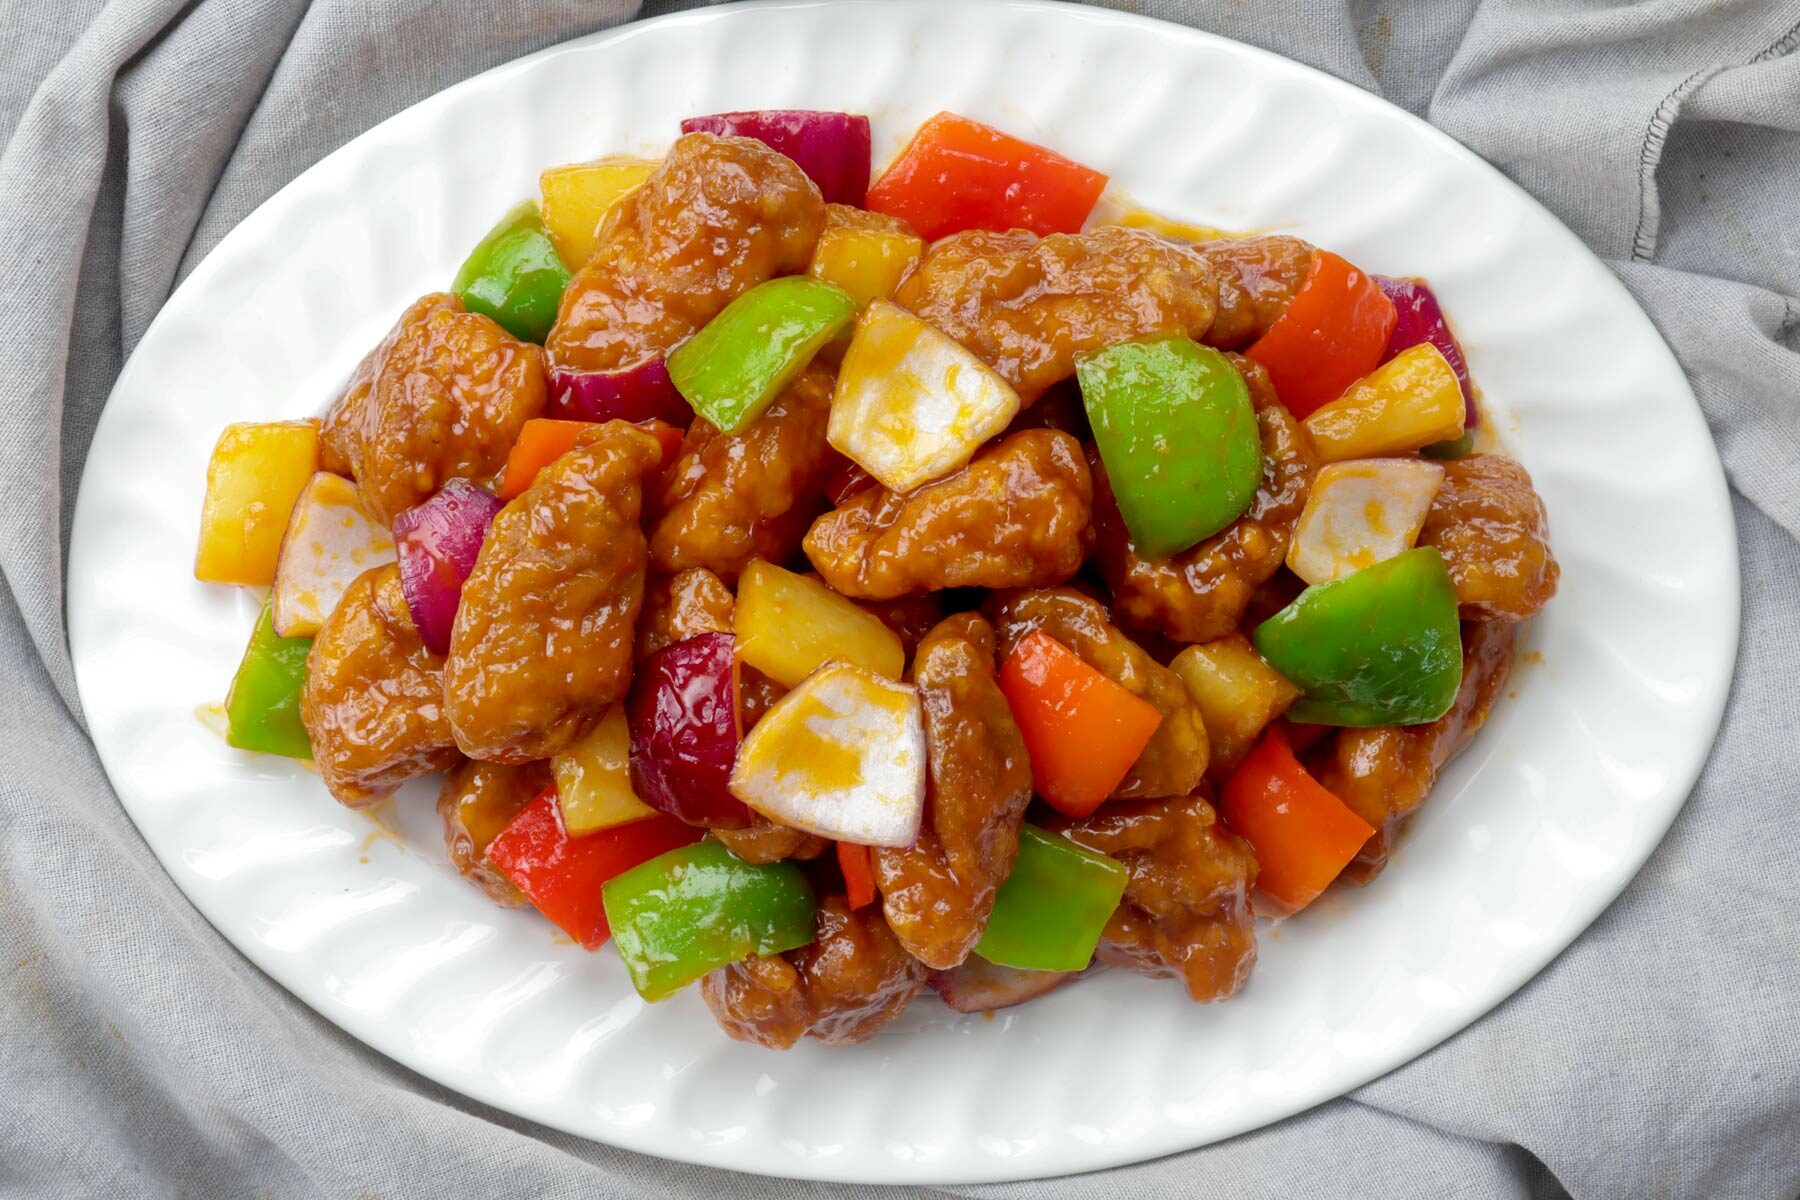 Crispy pork cutlets with bell pepper and pineapple chunks coated in a delicious sweet and sour sauce.